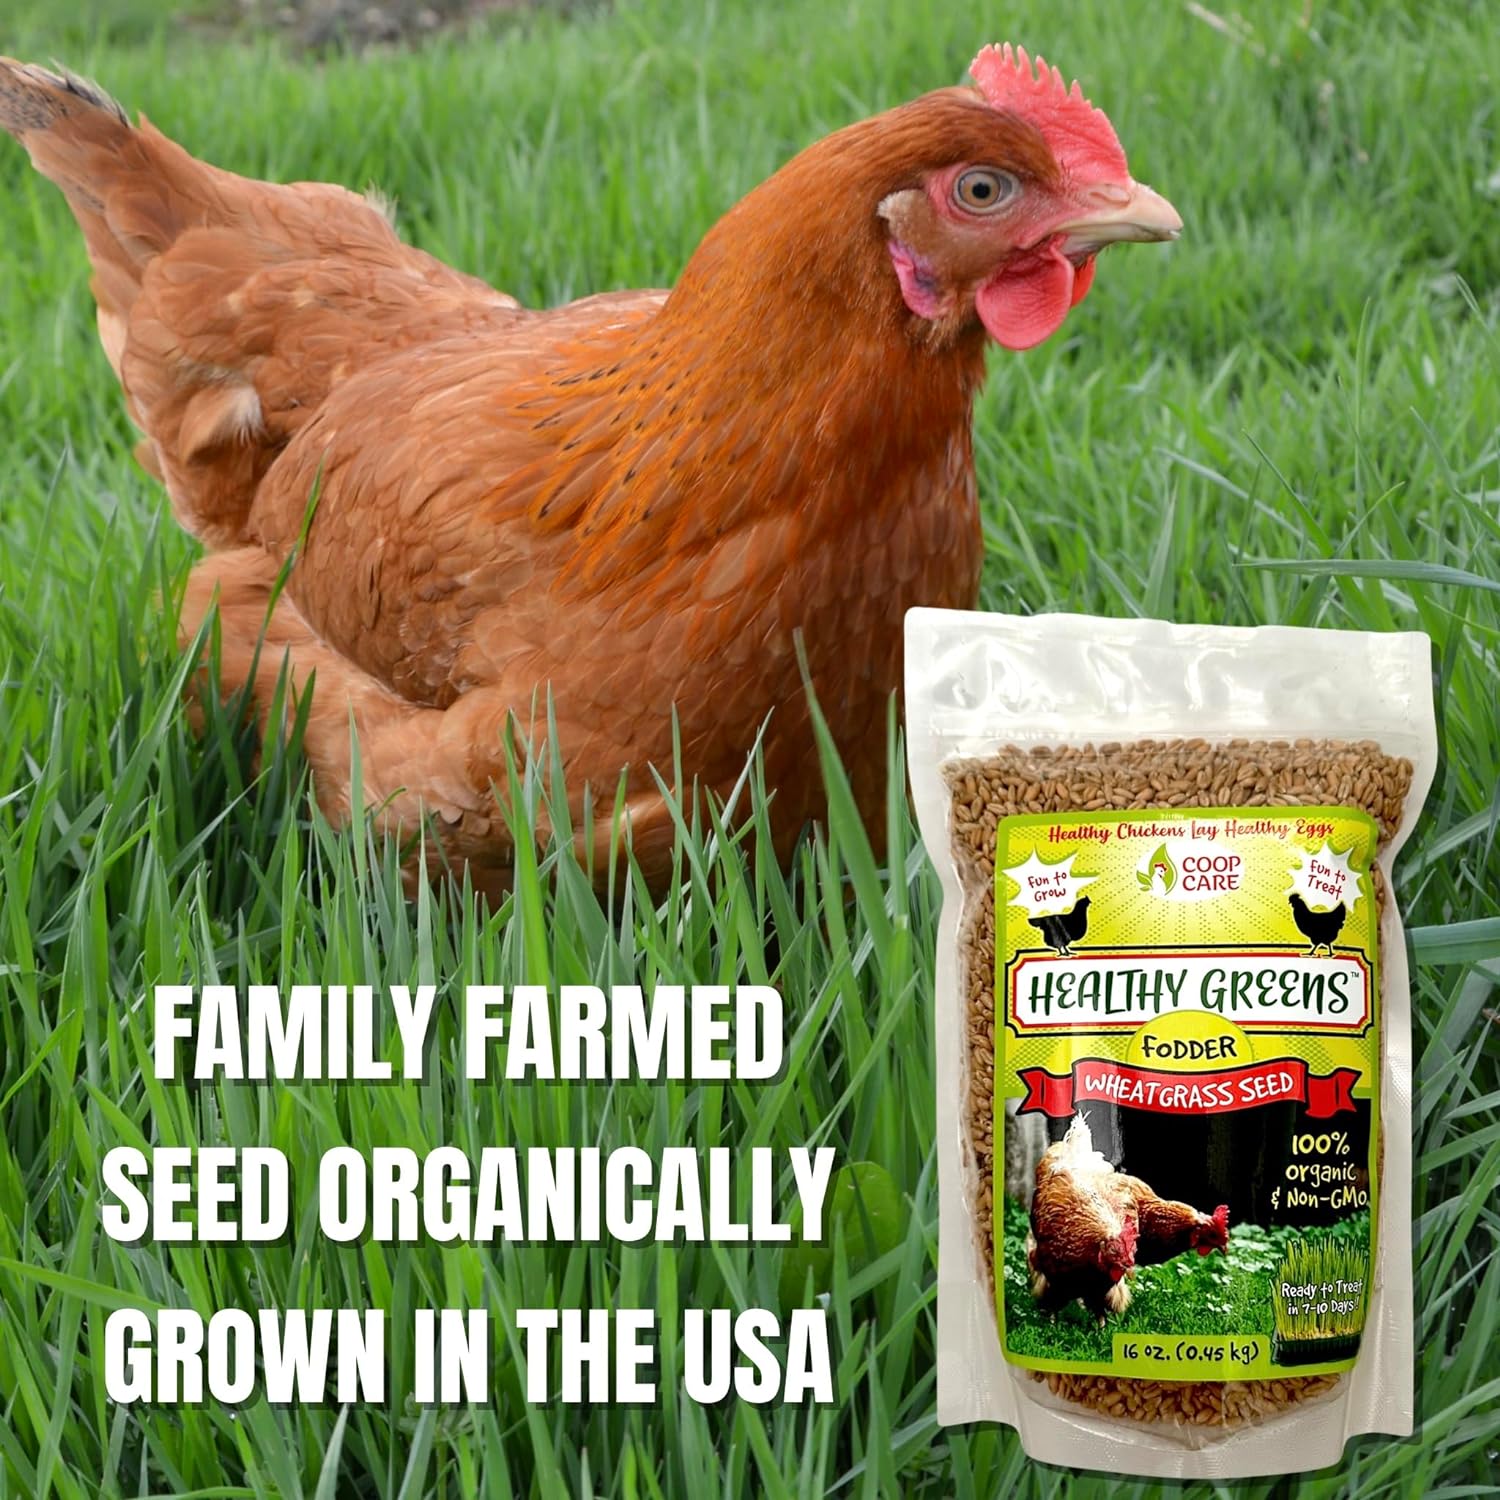 Healthy Greens Wheatgrass Fodder Seed, 1lb Bag. Premium Wheatgrass Seed, Non-GMO for Backyard Chickens, Plant Indoors/Outdoors. Also Ideal for Cats